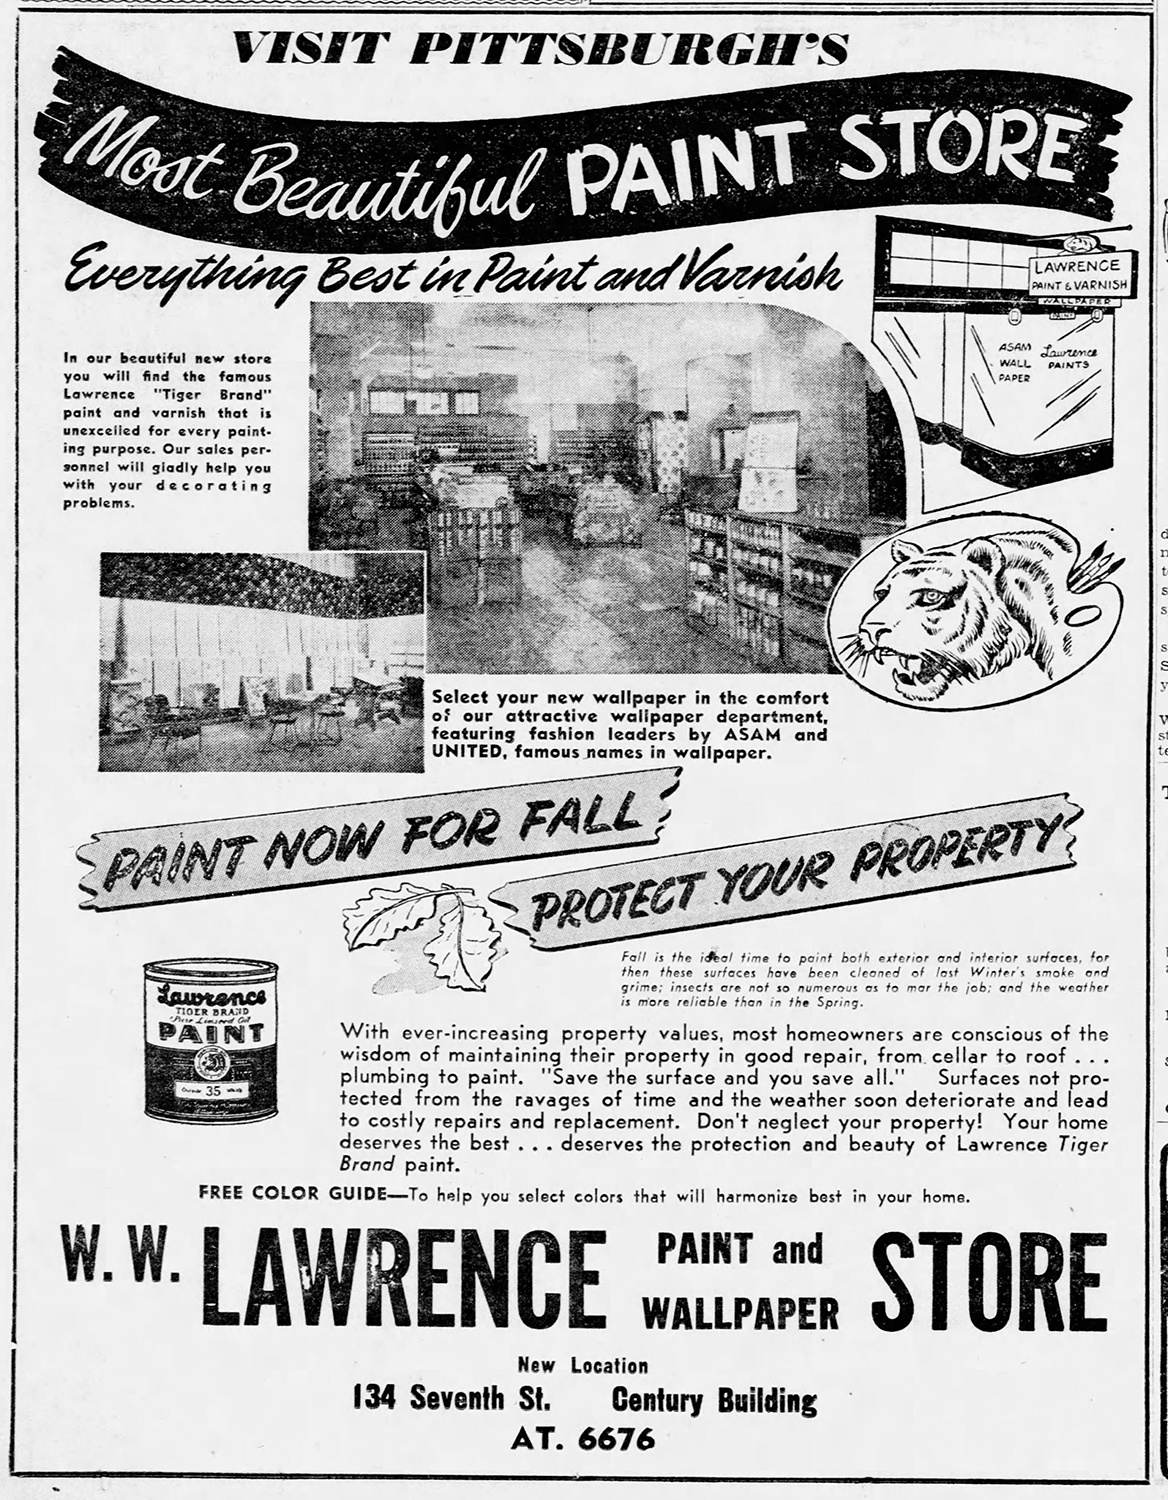 Advertisement with interior views of the W.W. Lawrence paint and wallpaper store that was located downtown in the Century Building. The Pittsburgh Press, September 21, 1947.